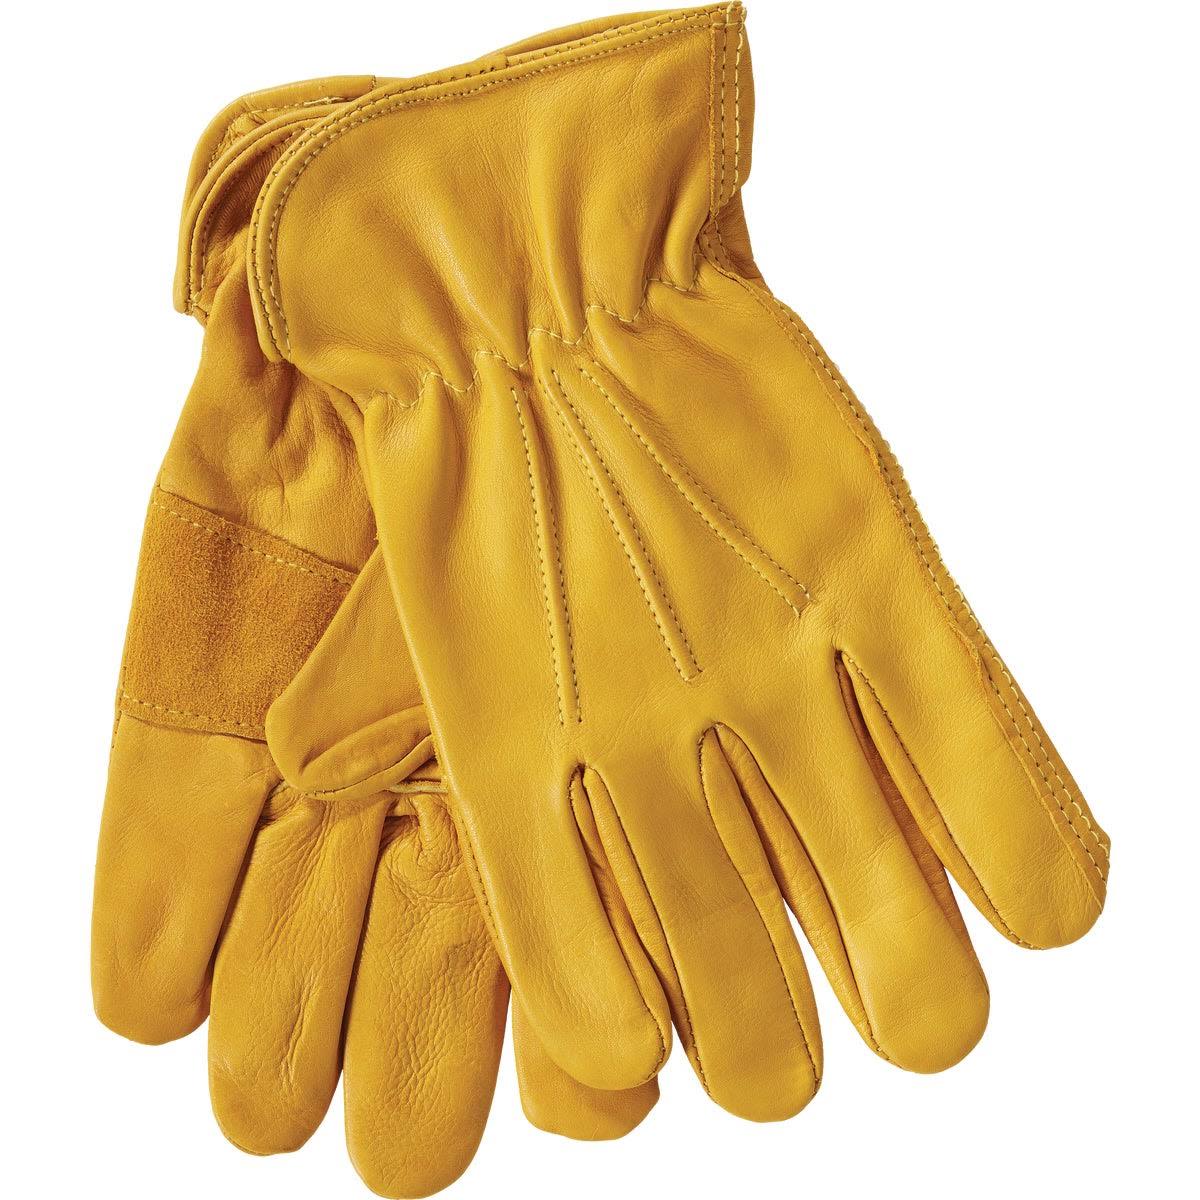 Hugo Boss Boss B81001-XL Cowhide Leather Driver Work Gloves, Yellow, Extra Large